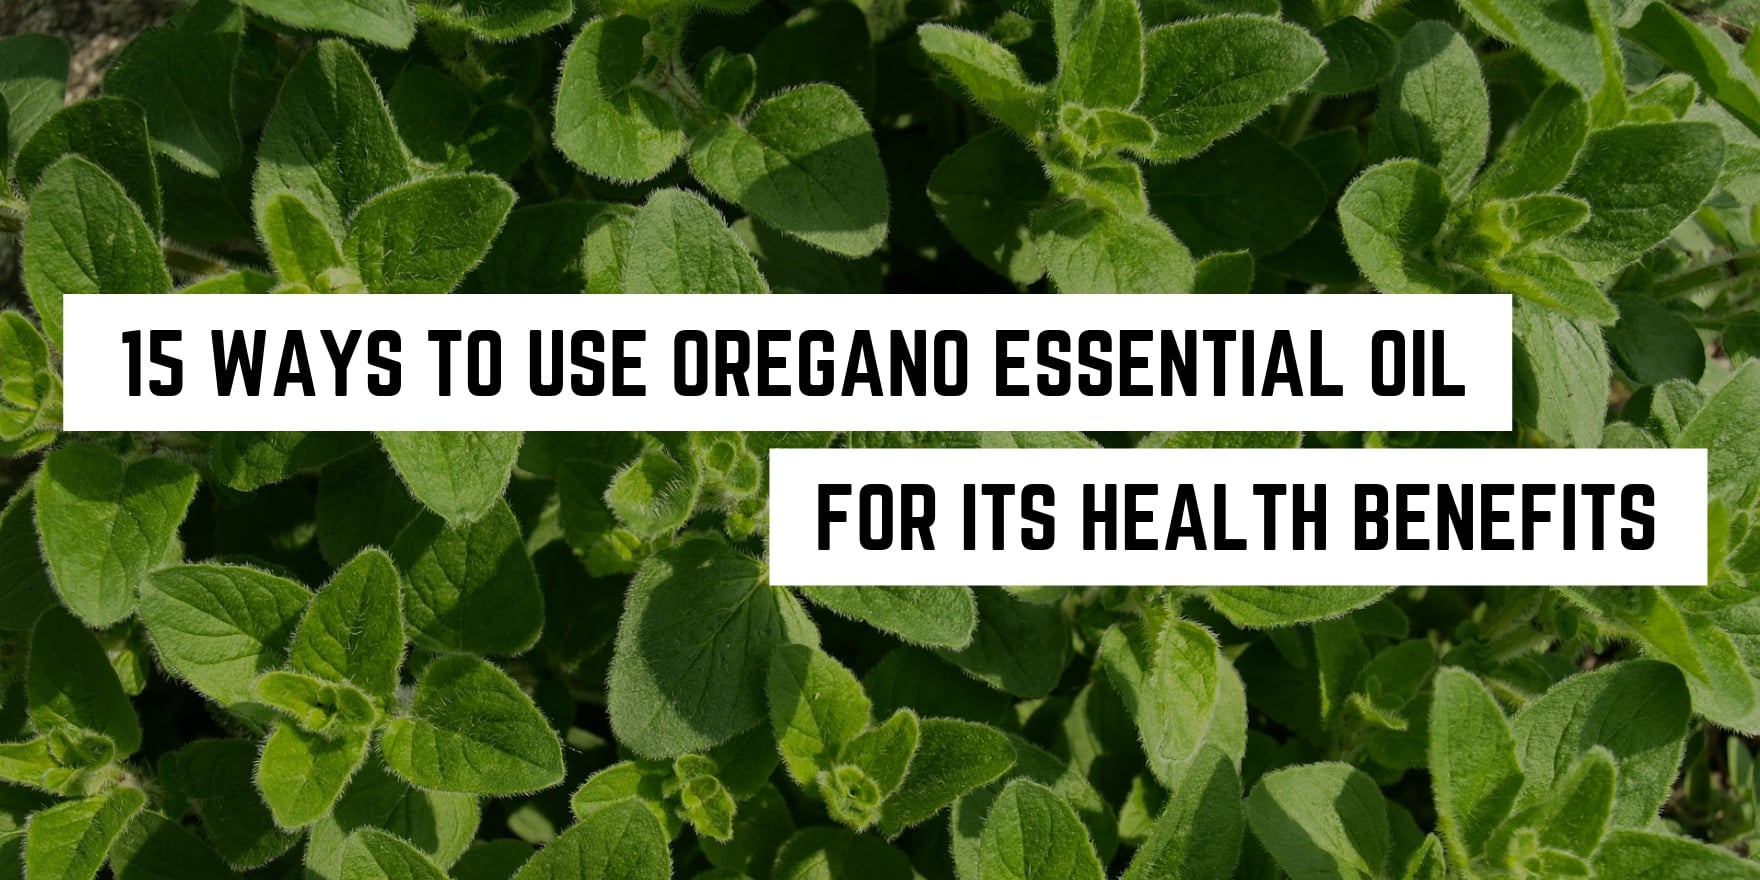 15 Ways to Use Oregano Essential Oil for its Health Benefits